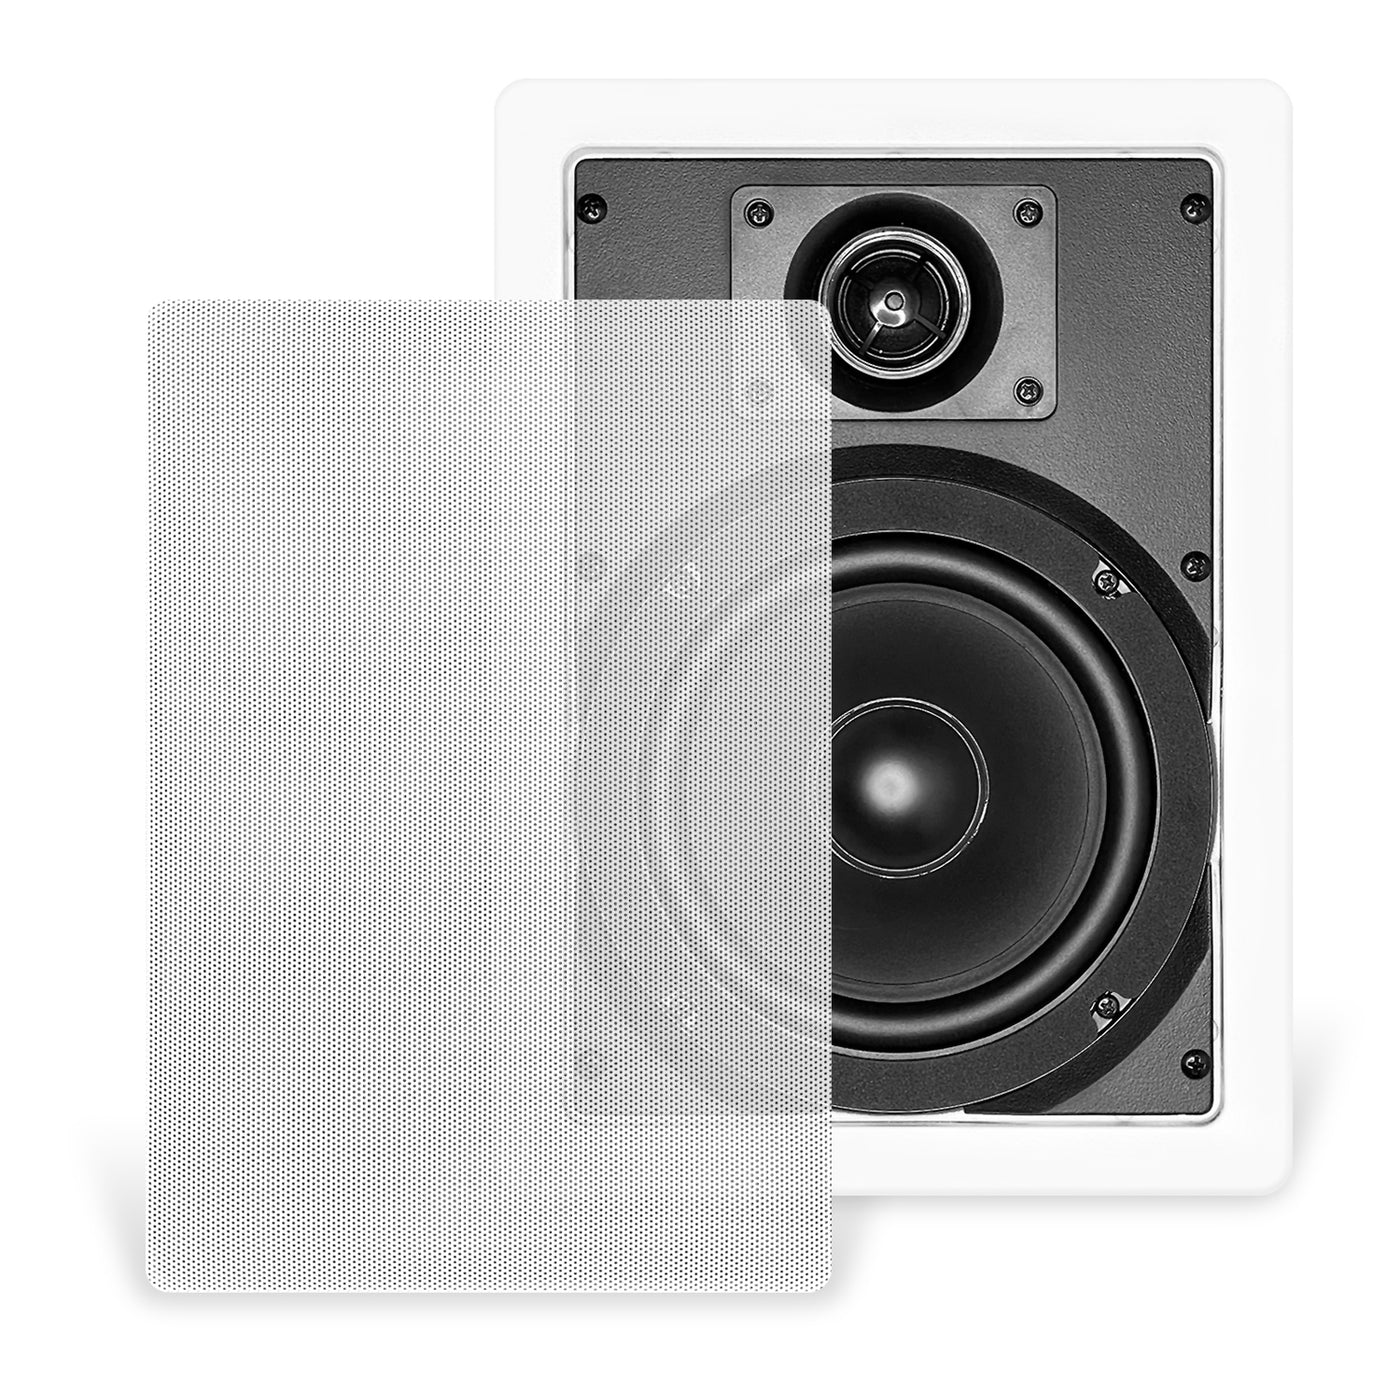 Bio In-Wall 6.5" Home Audio Speaker with Rotatable 25mm Silk Dome Tweeter (1 Speaker) - CT SOUNDS